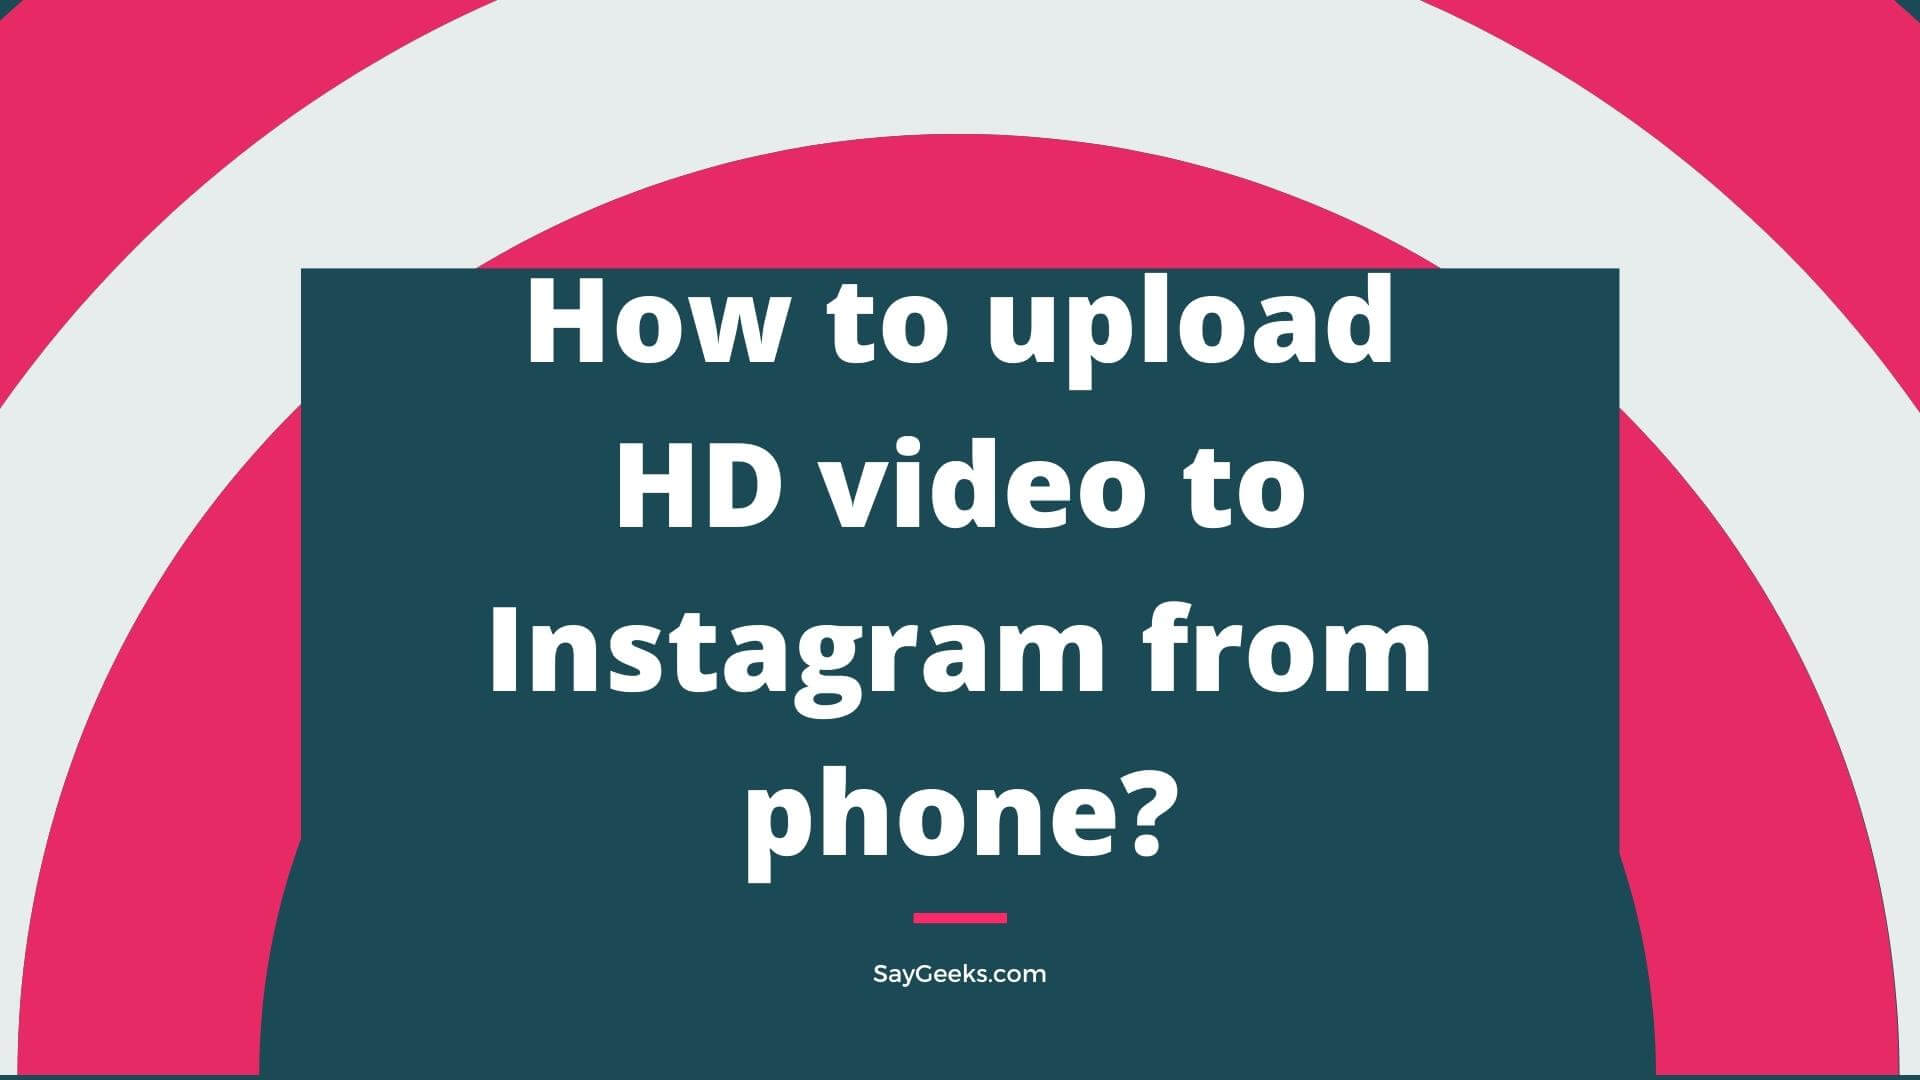 How to upload HD video to Instagram from phone?